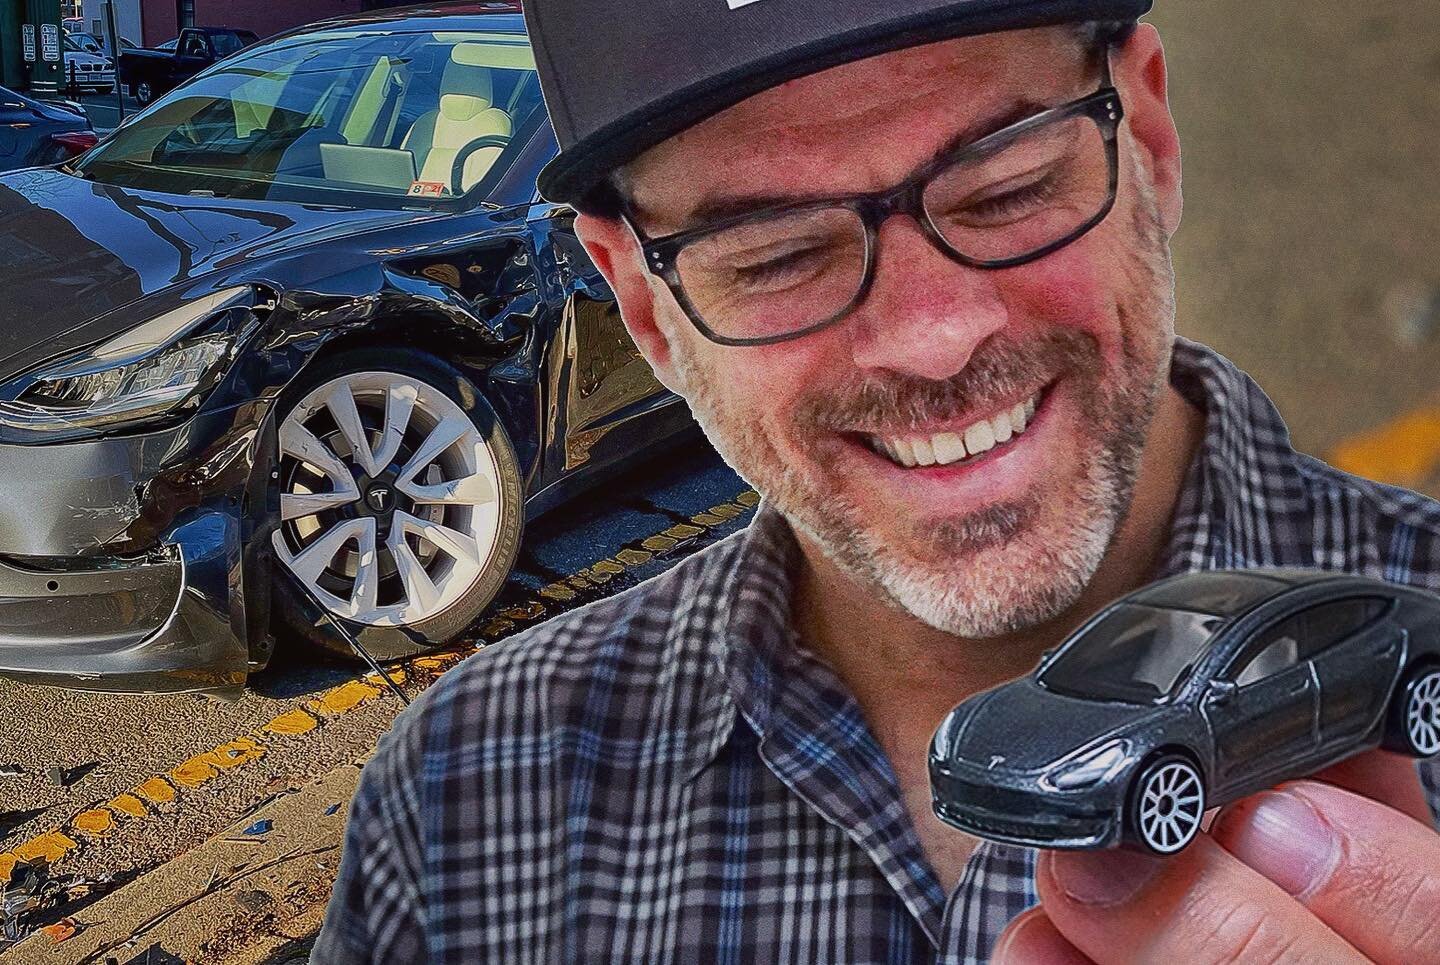 Richmond friends all know Jason Lefton and his laser artistry at Big Secret. Many know that he was a Tesla Model 3 early adopter. IDK if everyone knows it was recently totaled. He&rsquo;s ok. Today, in a new You Tube video, I make him a custom Hot Wh